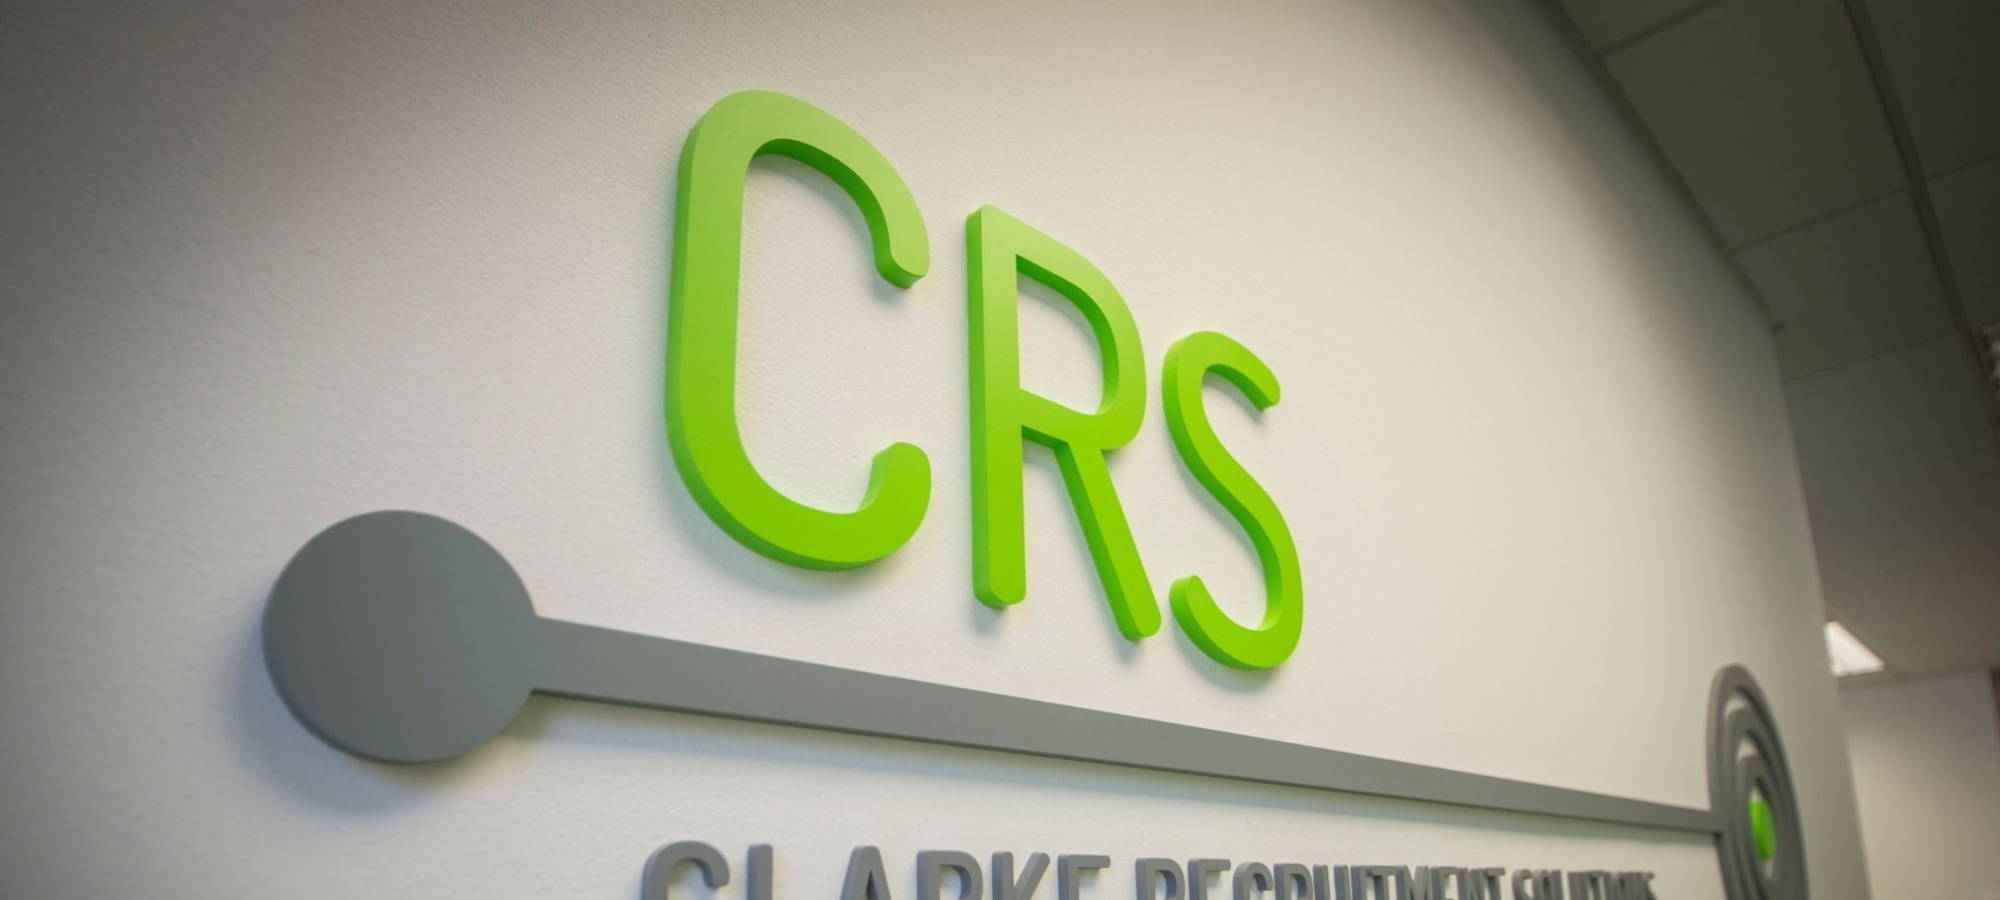 The CRS logo on our office wall.